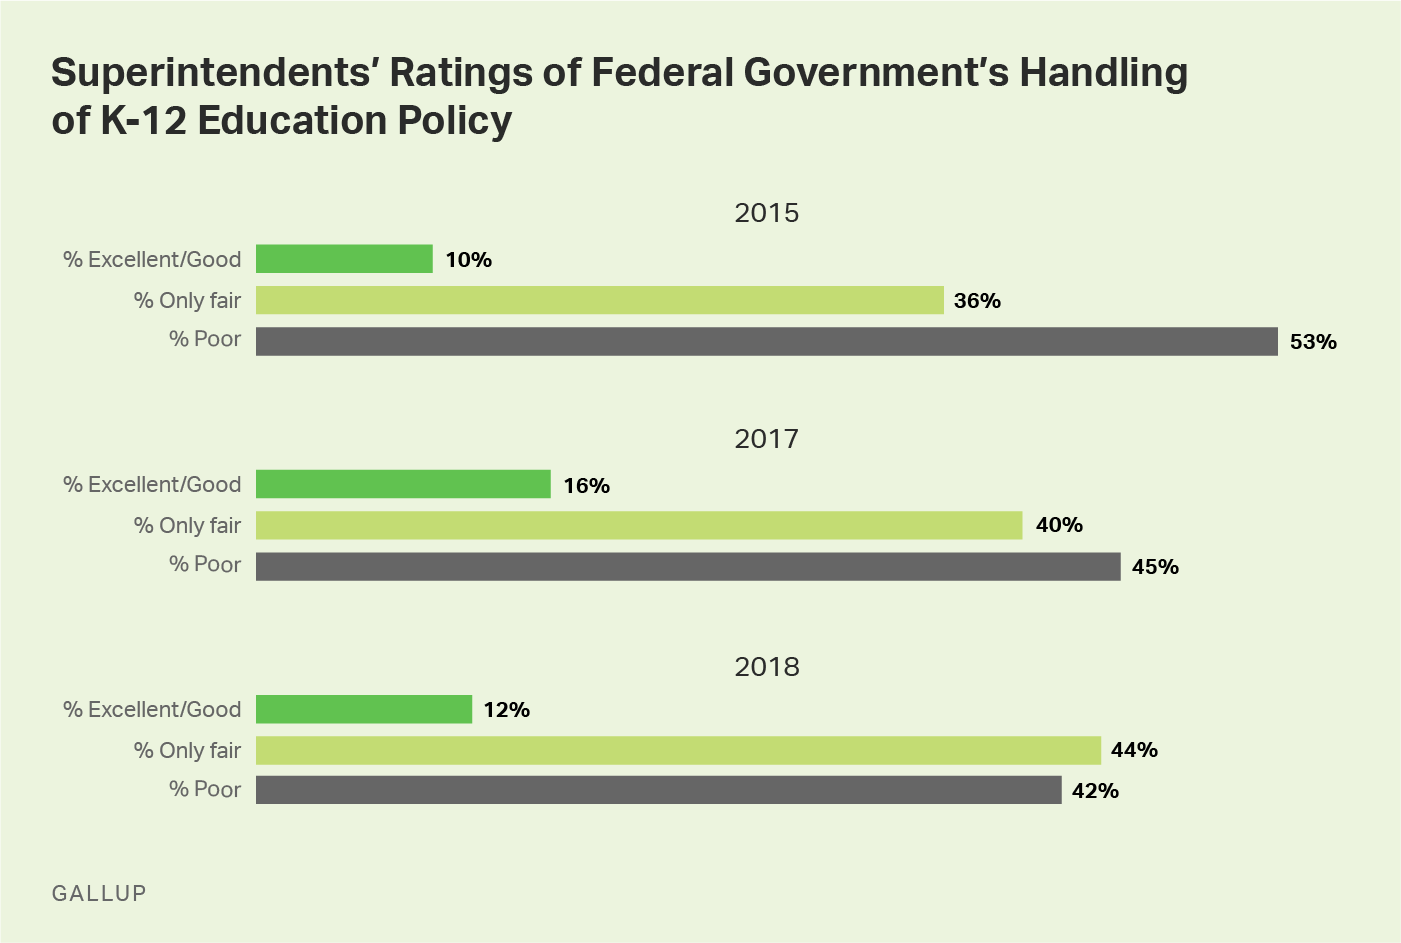 Custom Graphic Showing Superintendents' Ratings of Federal Government's Handling of Education Policy